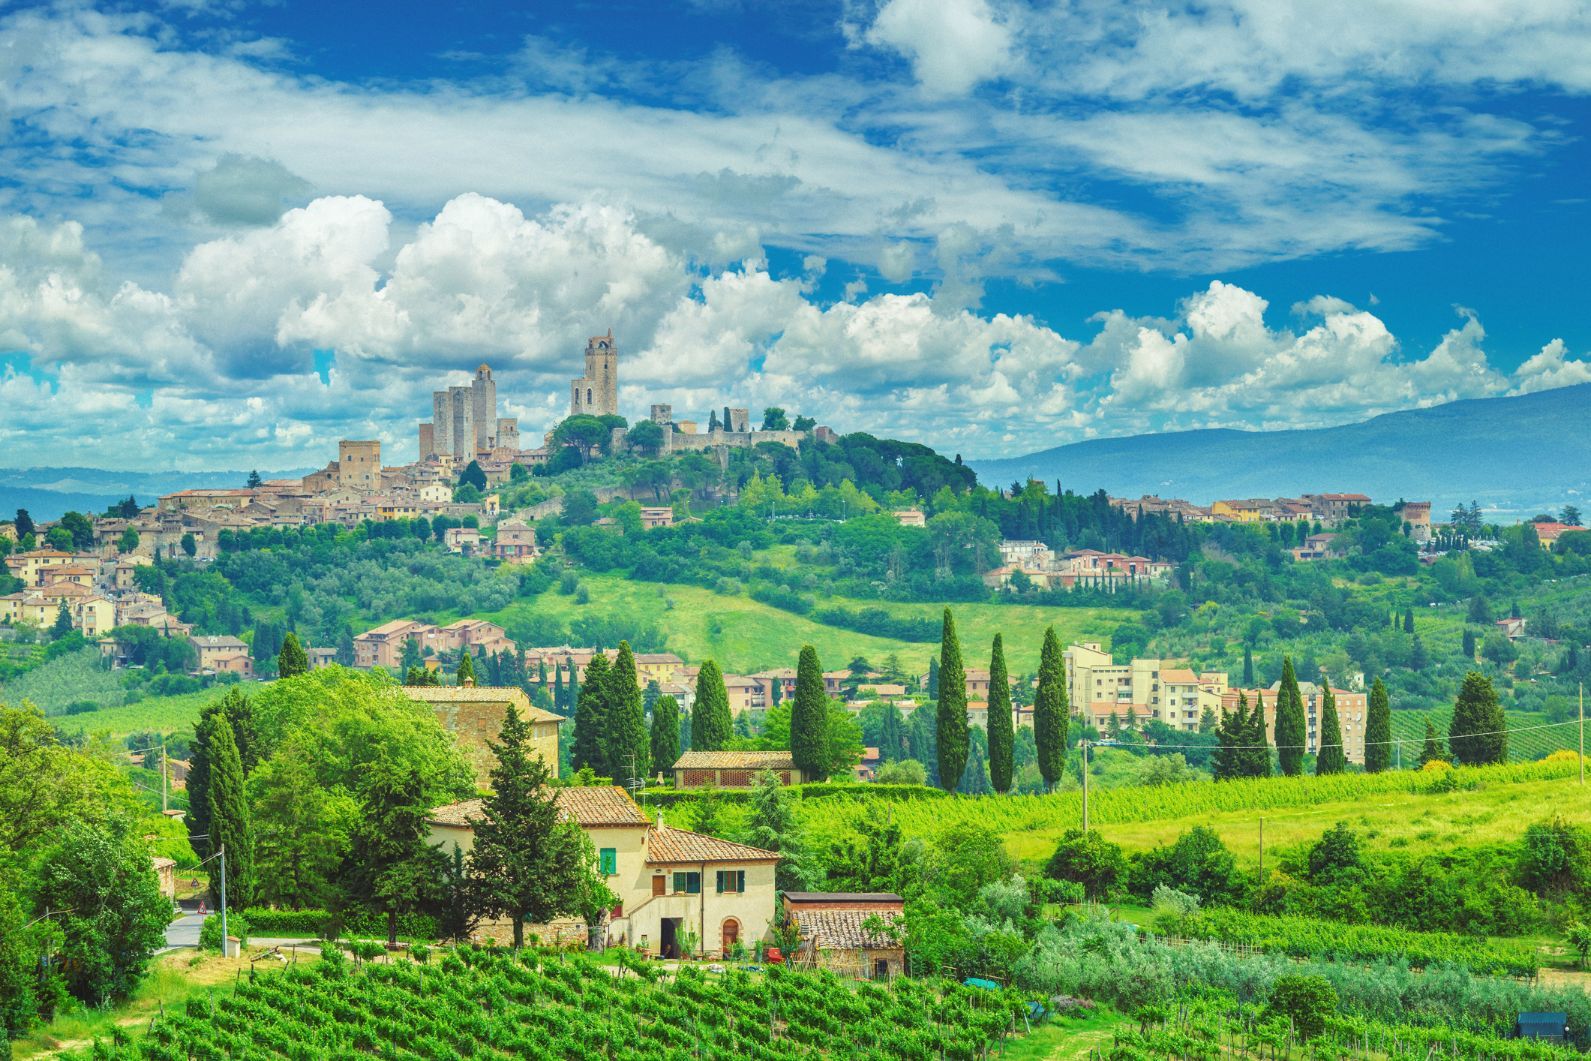 A view of the beautiful Tuscan town of San Gimignano